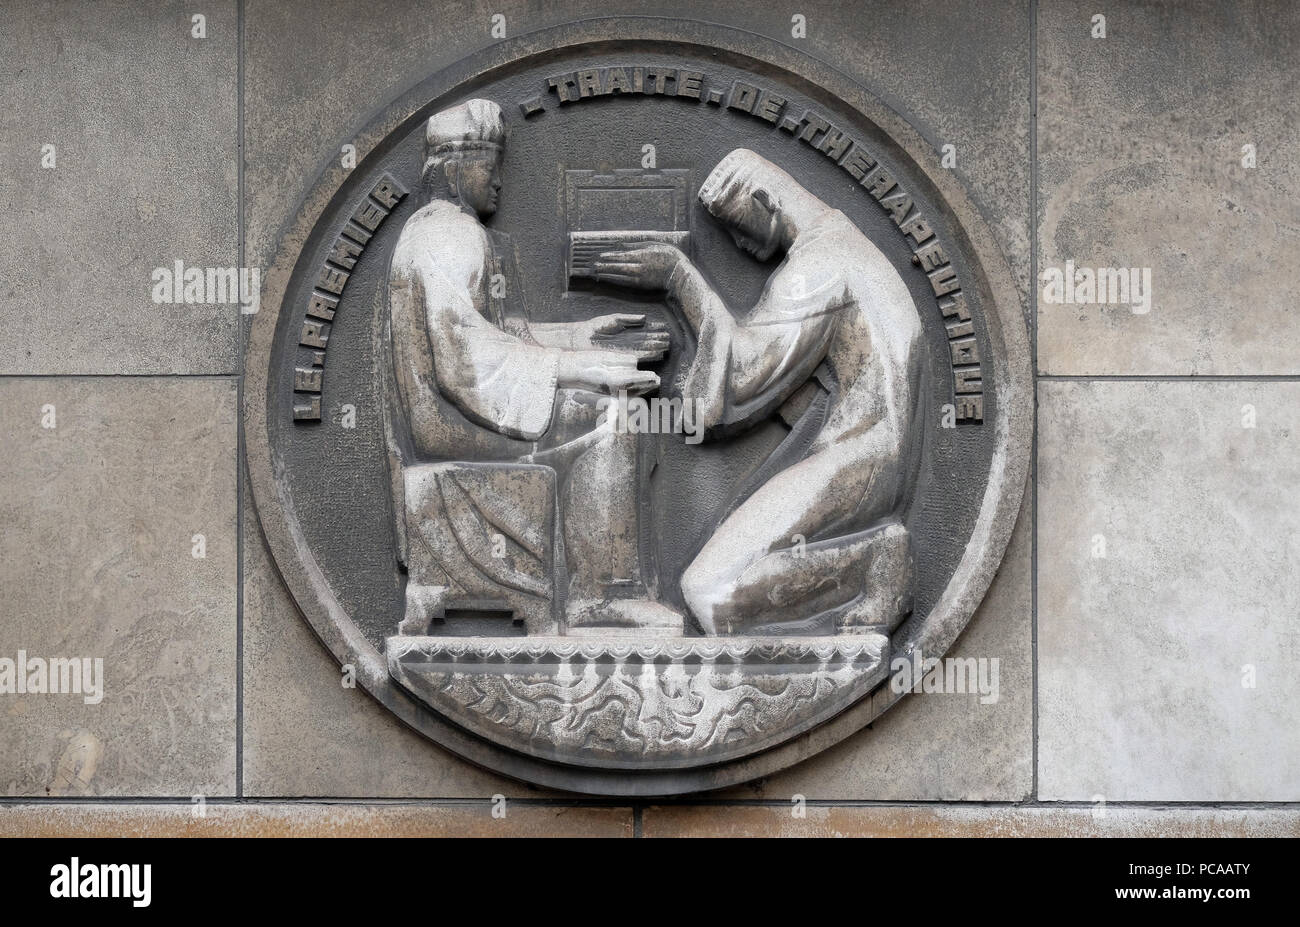 The first therapeutic treatise. Stone relief at the building of the Faculte de Medicine Paris, France Stock Photo